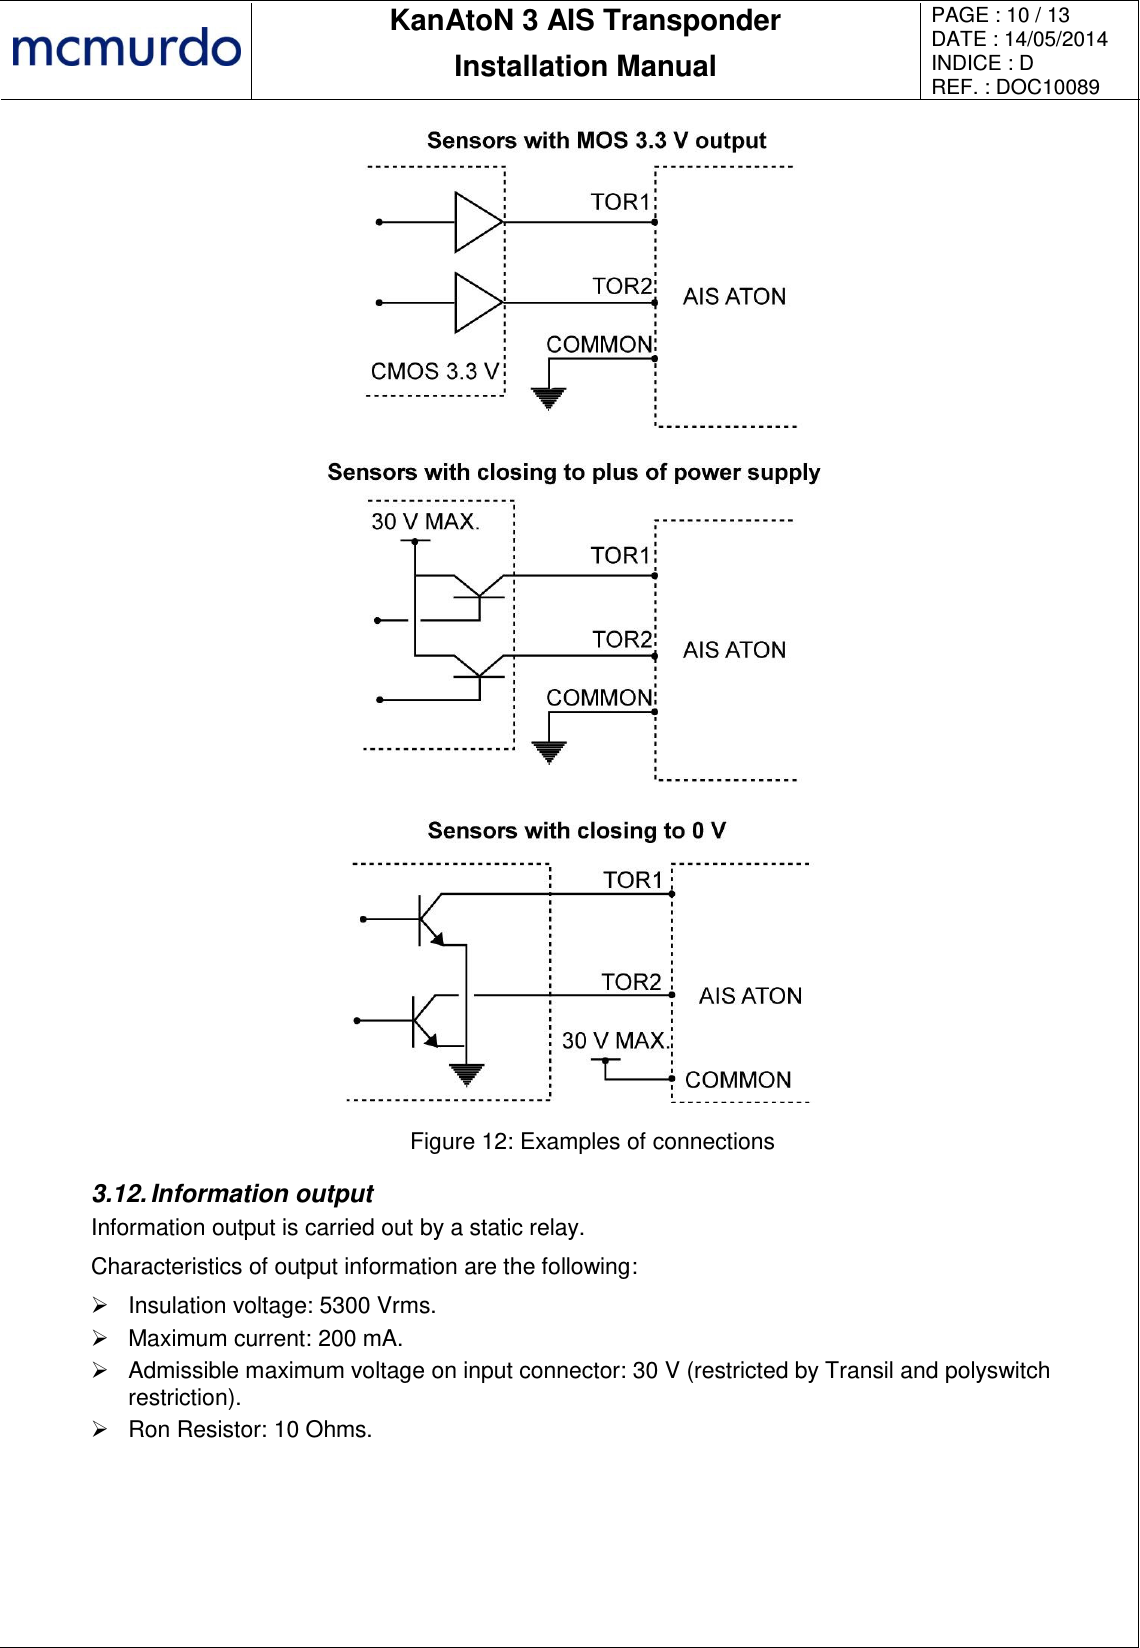       KanAtoN 3 AIS Transponder Installation Manual PAGE : 10 / 13 DATE : 14/05/2014 INDICE : D REF. : DOC10089    Figure 12: Examples of connections 3.12. Information output Information output is carried out by a static relay. Characteristics of output information are the following:   Insulation voltage: 5300 Vrms.   Maximum current: 200 mA.   Admissible maximum voltage on input connector: 30 V (restricted by Transil and polyswitch restriction).   Ron Resistor: 10 Ohms. 